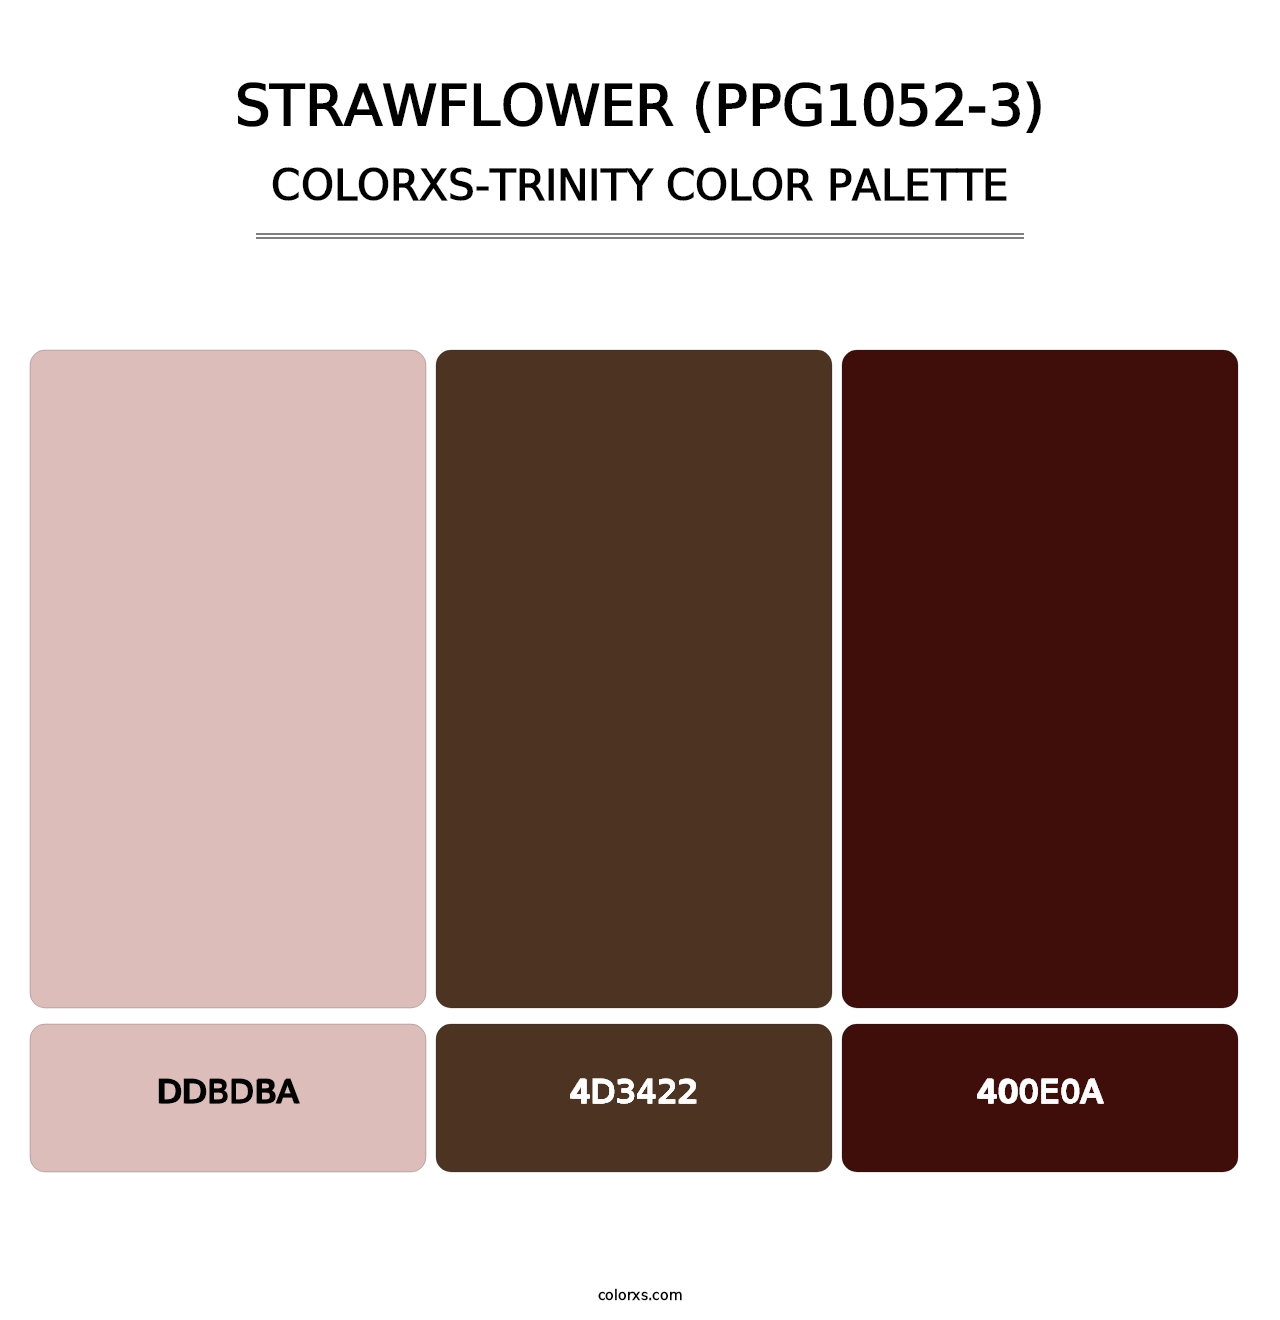 Strawflower (PPG1052-3) - Colorxs Trinity Palette